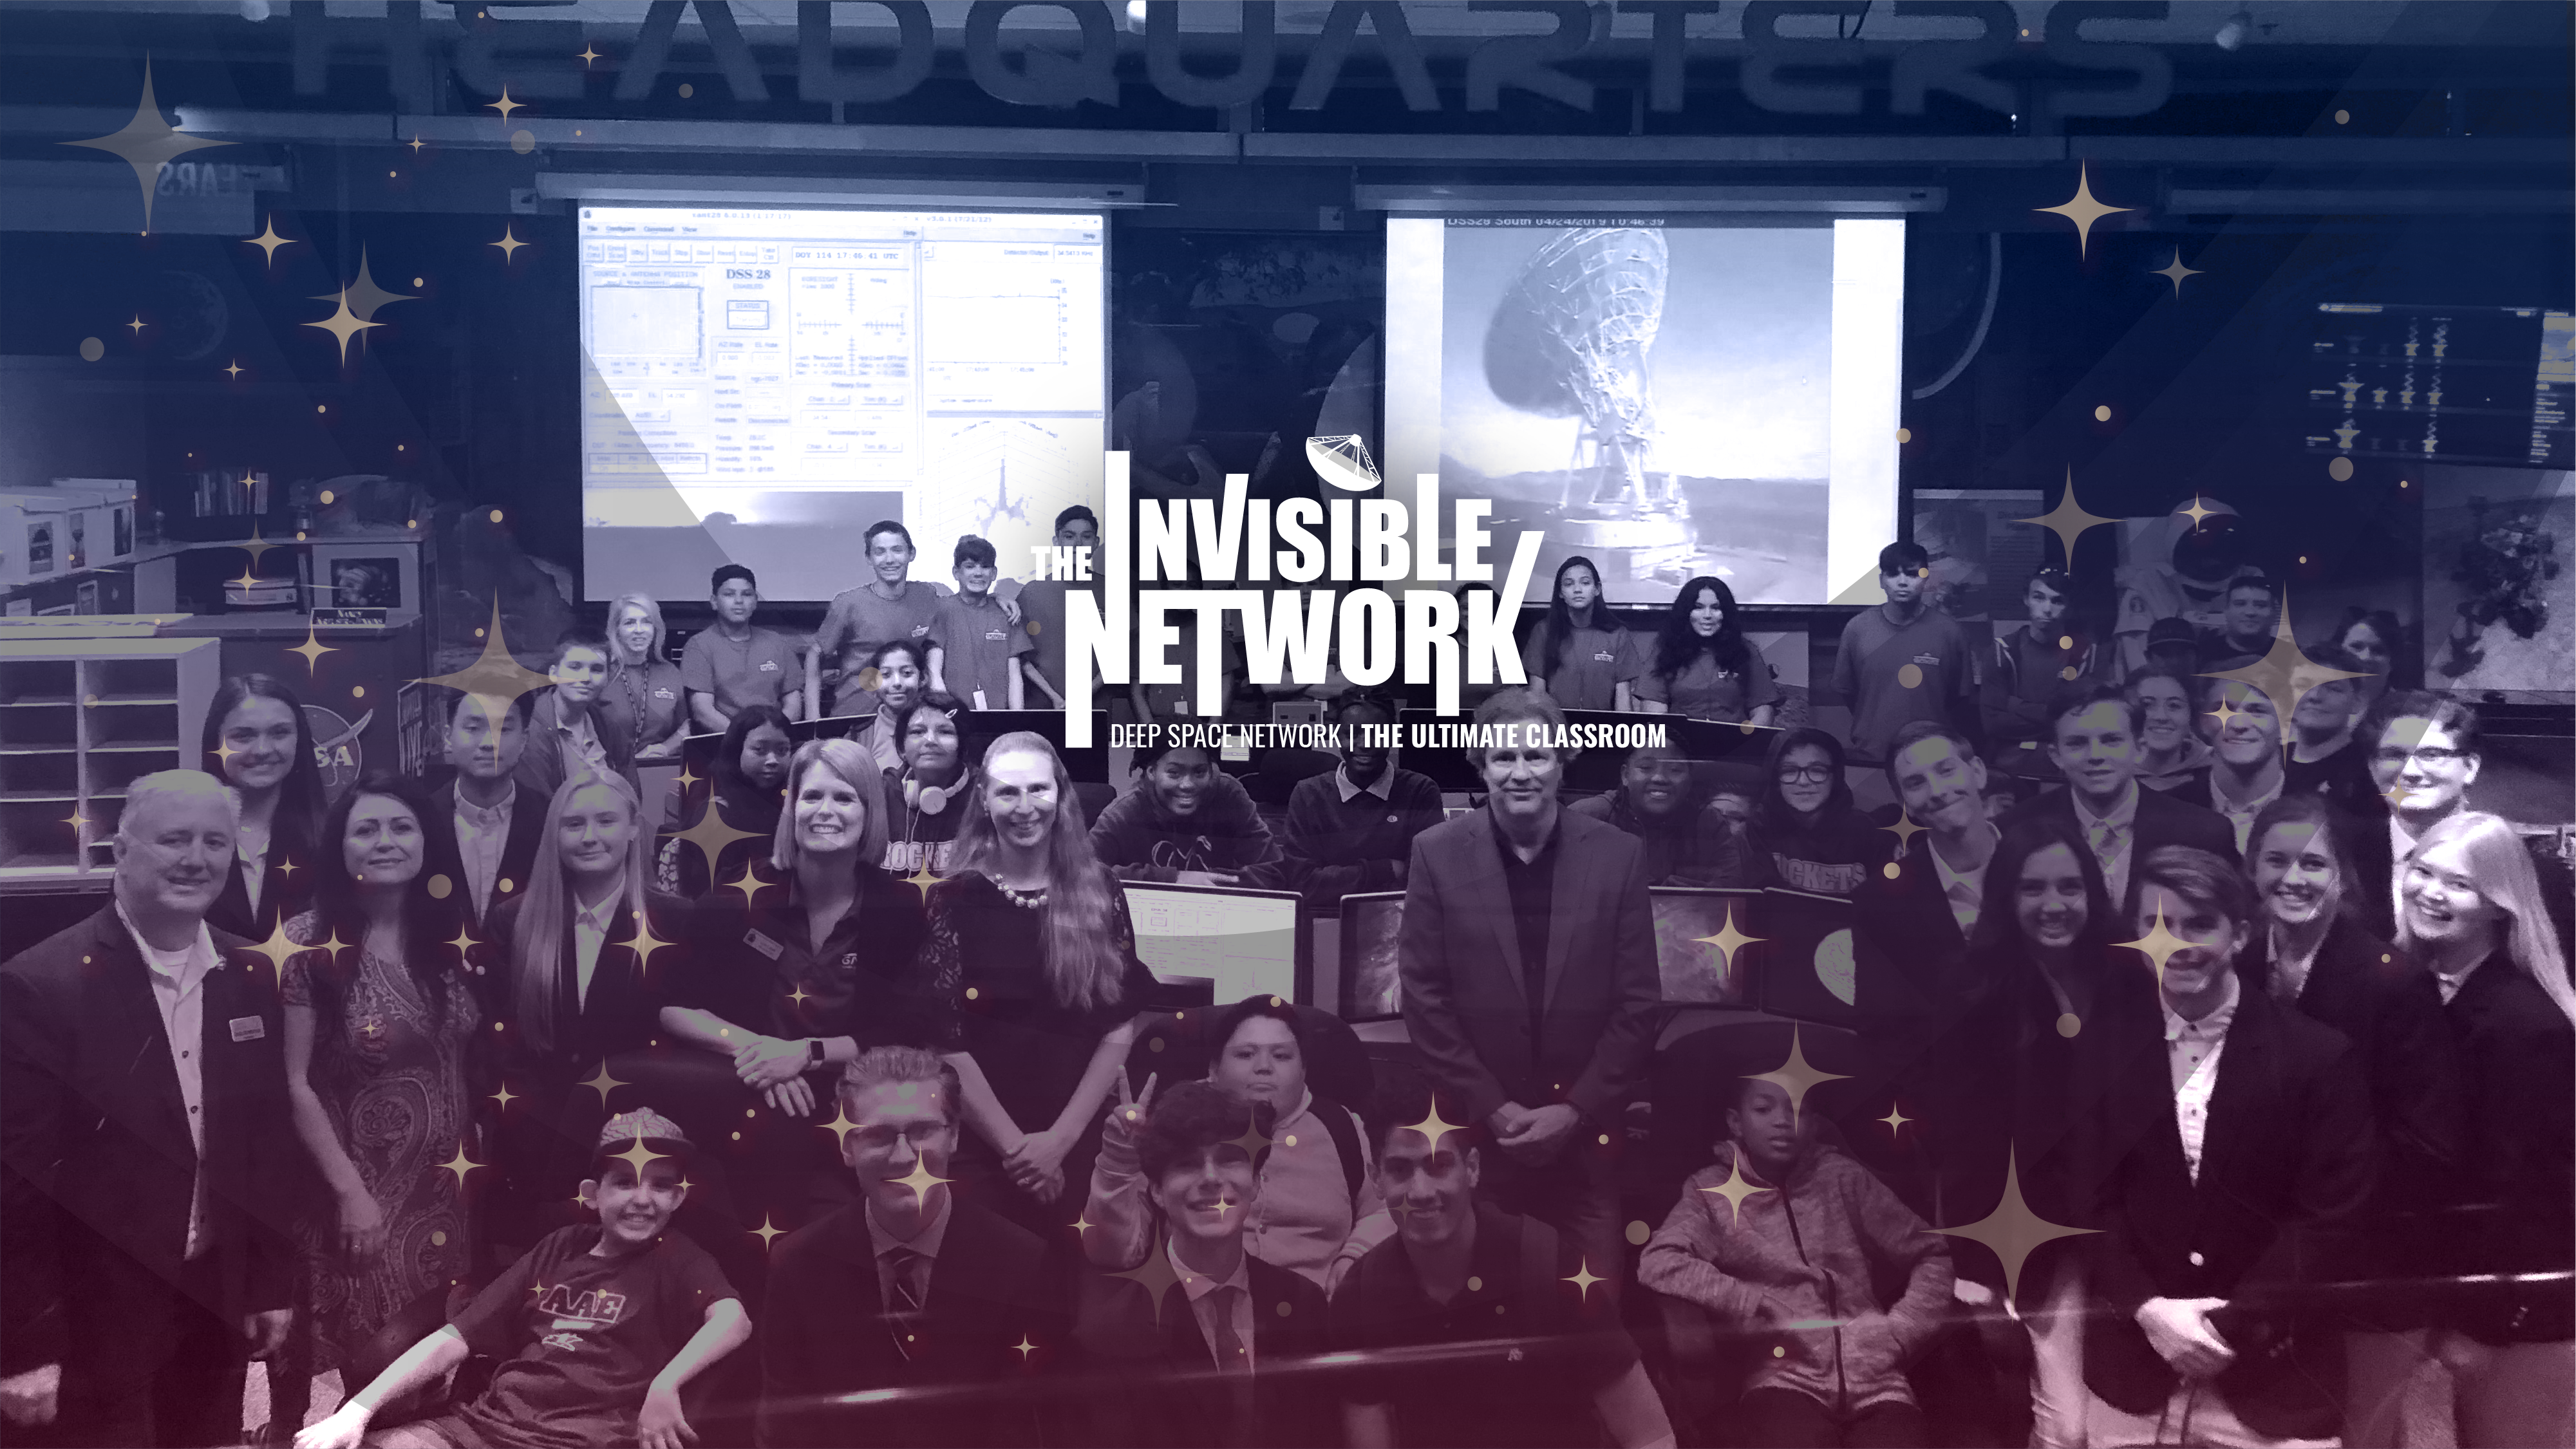 An image of students from the Lewis Center for Educational Research participating in the Goldstone Apple Valley Radio Telescope (GAVRT) program overlaid with elements from The Invisible Network podcast promotional graphics.